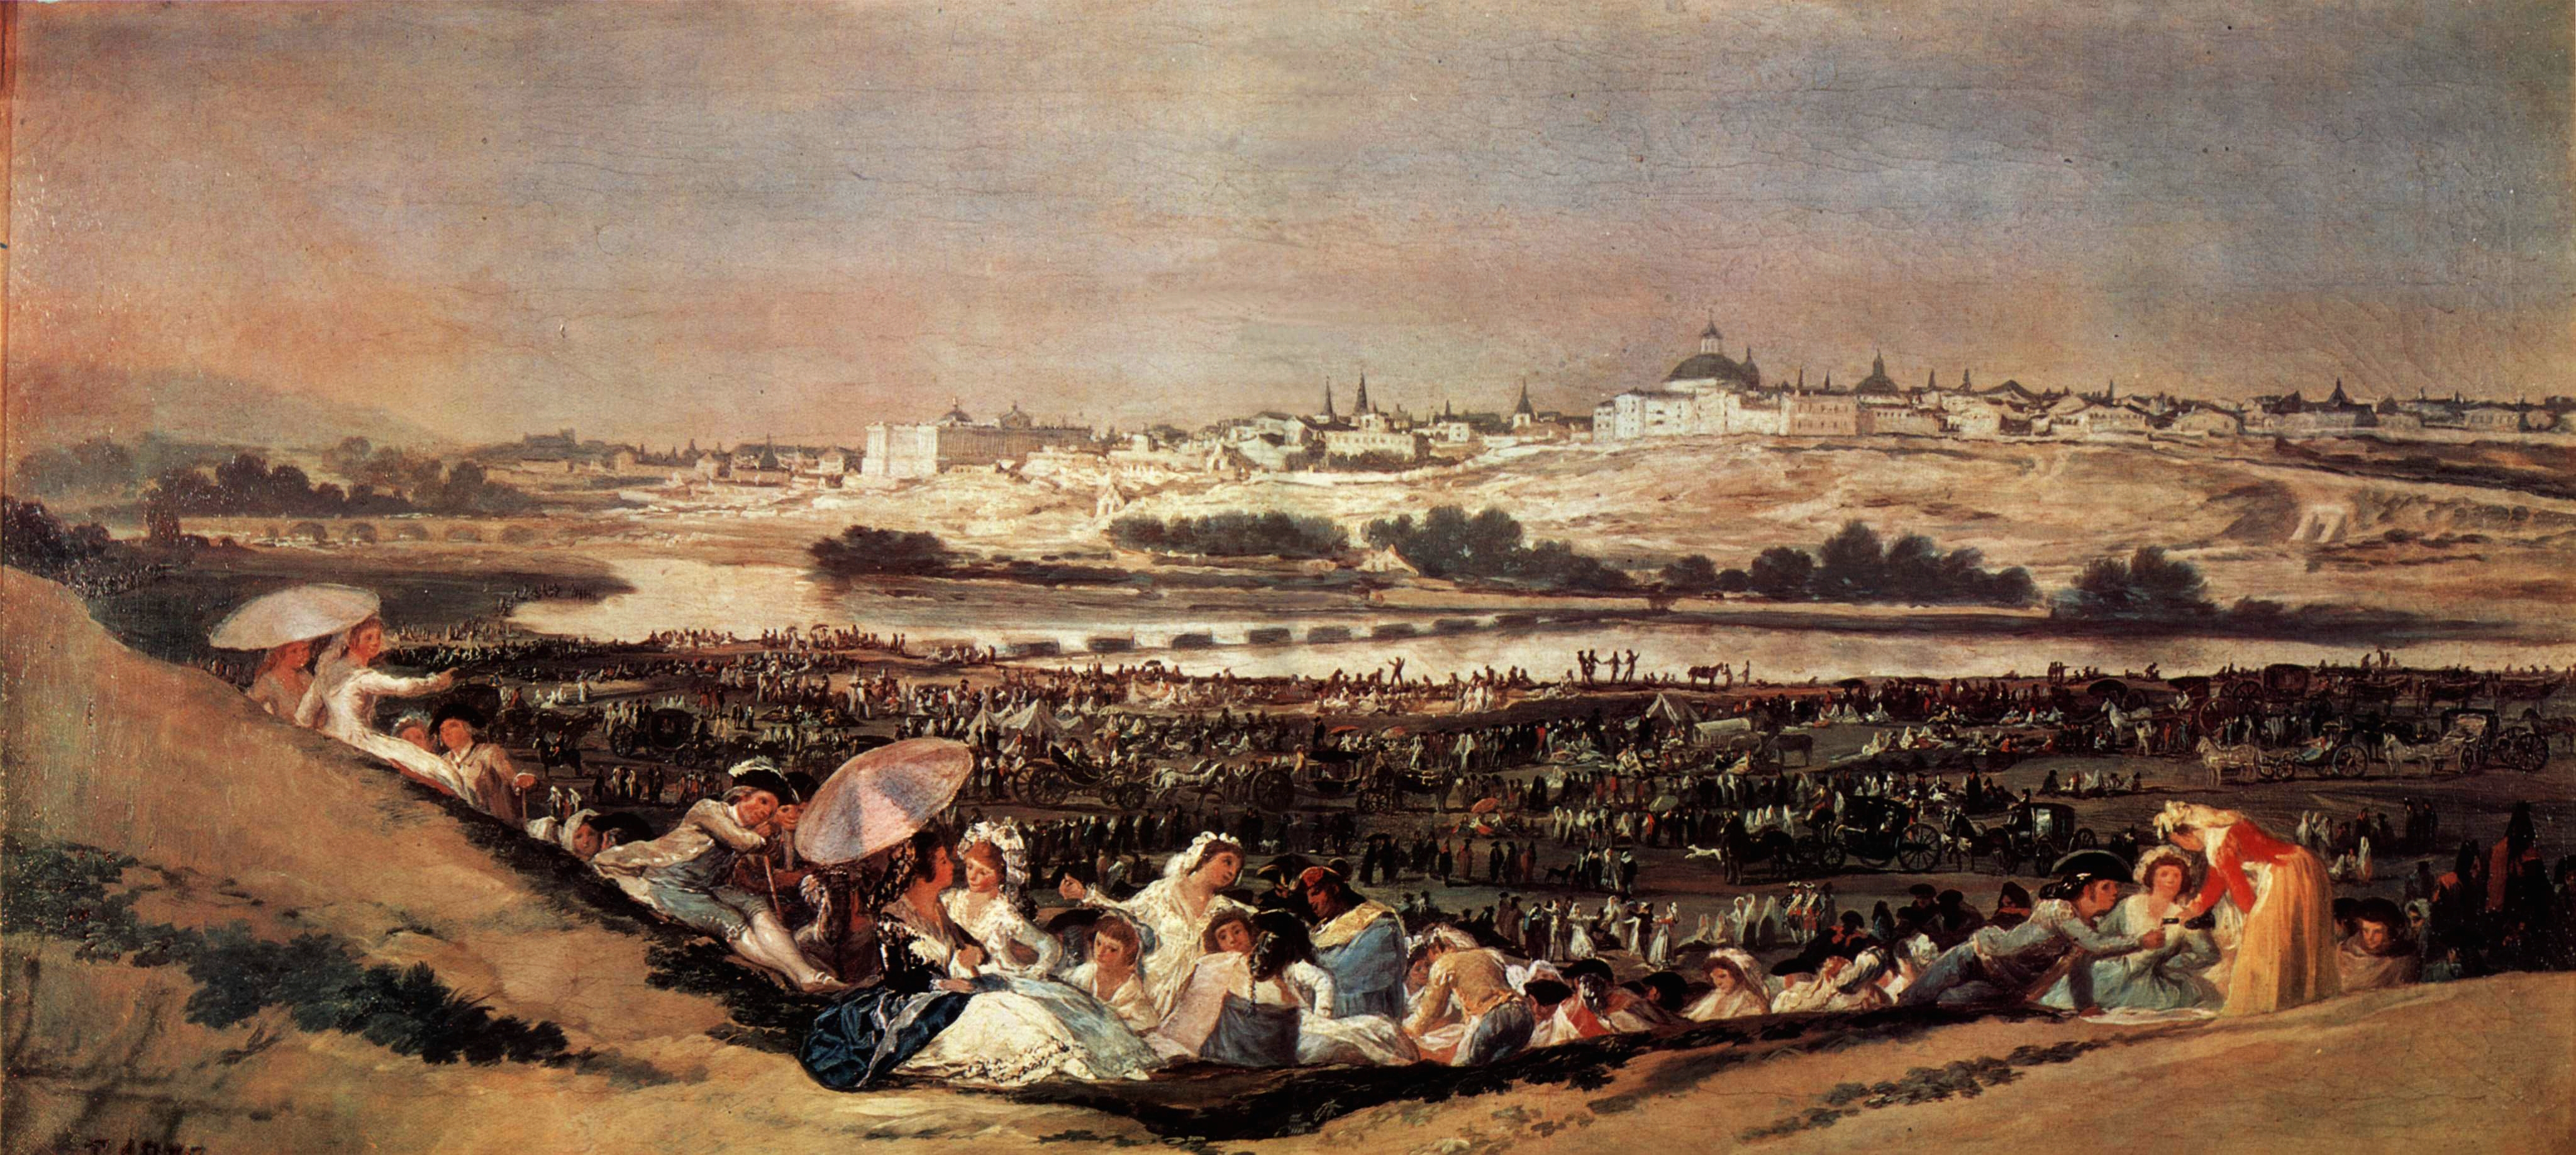 The Meadow of San Isidro on his Feast Day (1788).